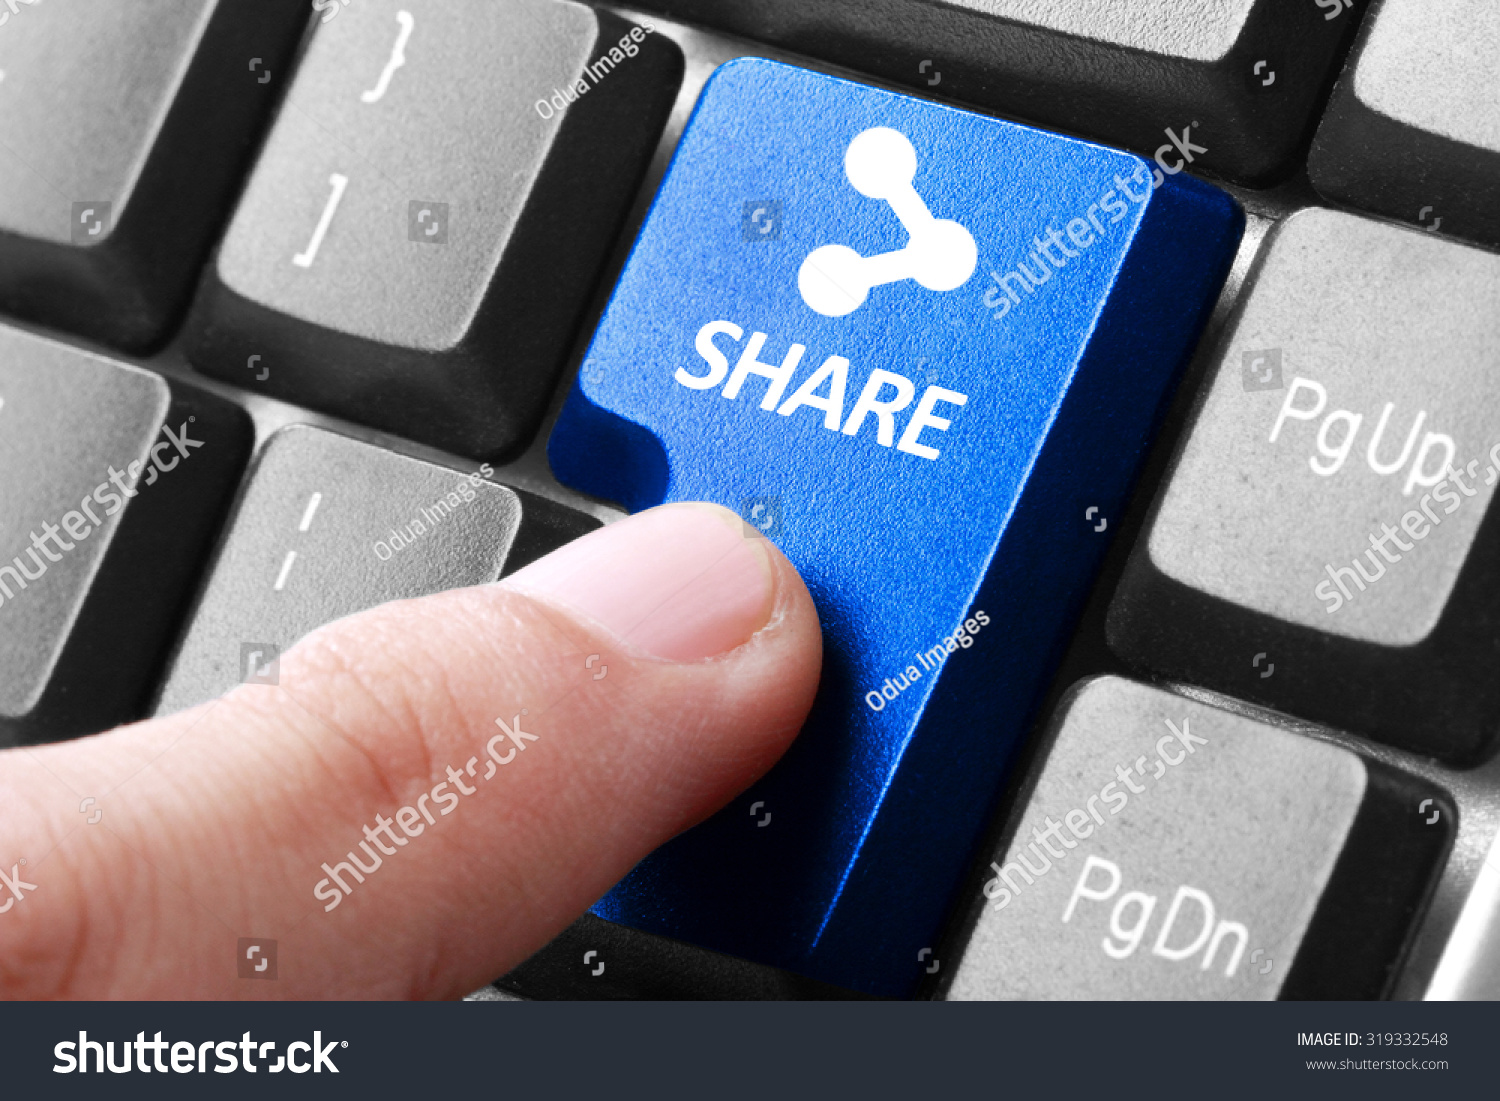 Sharing file. gesture of finger pressing share button on a computer keyboard #319332548